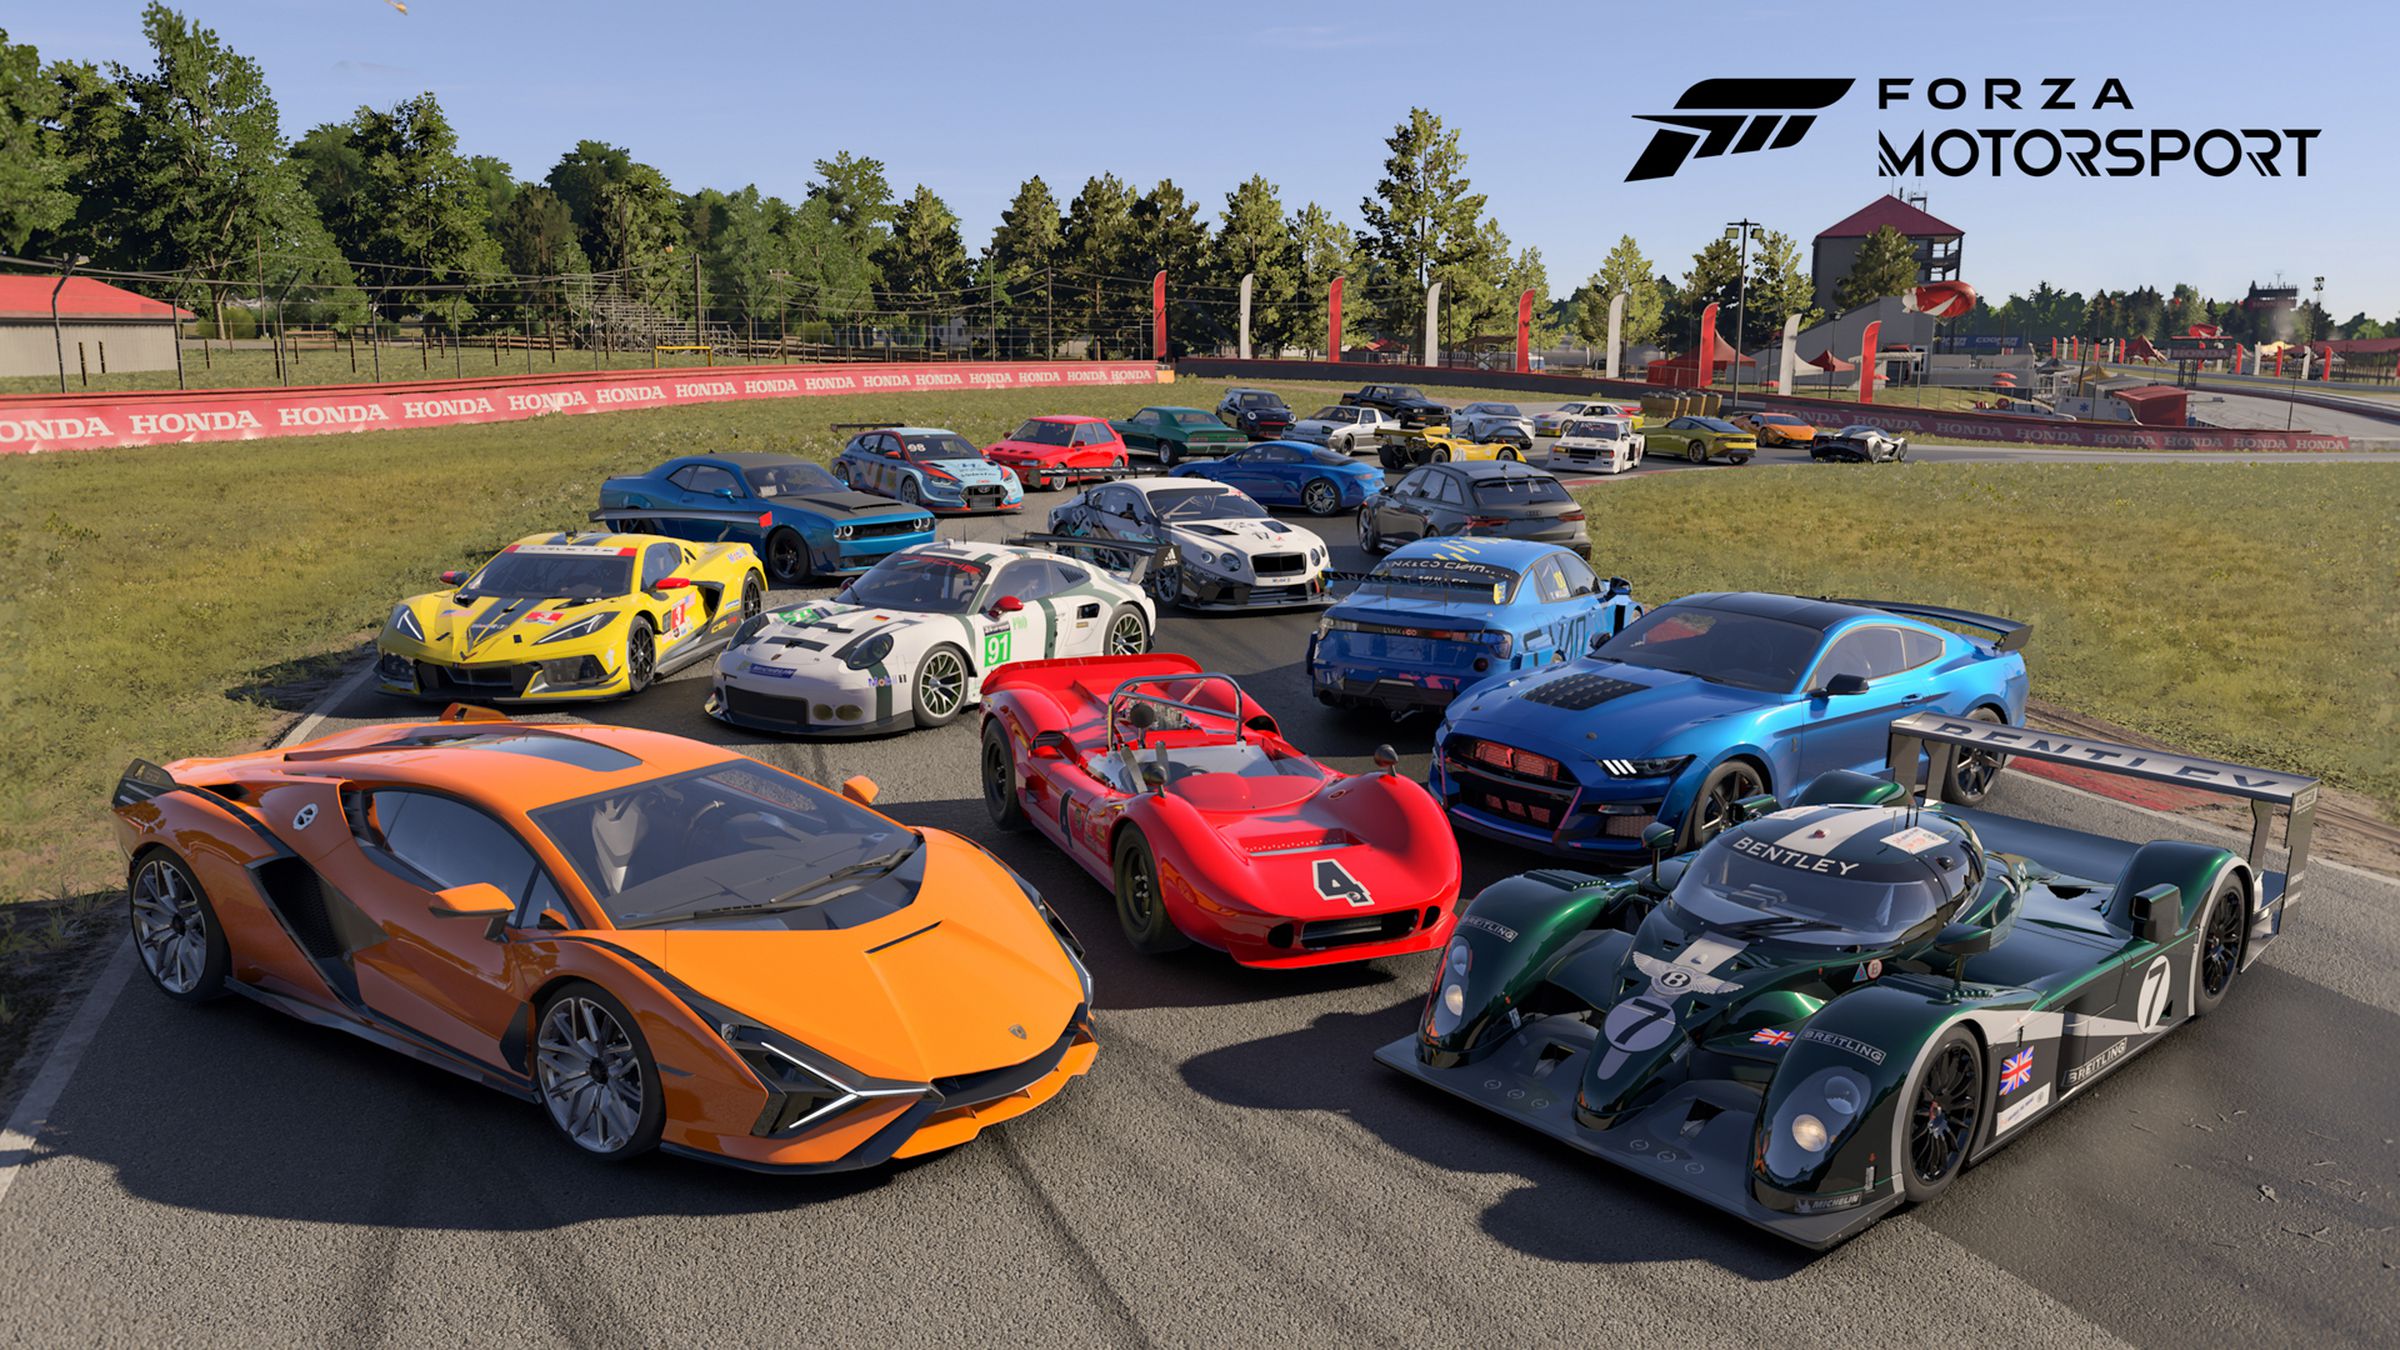 Racing and high-performance cars parked on a track in the game Forza Motorsport.